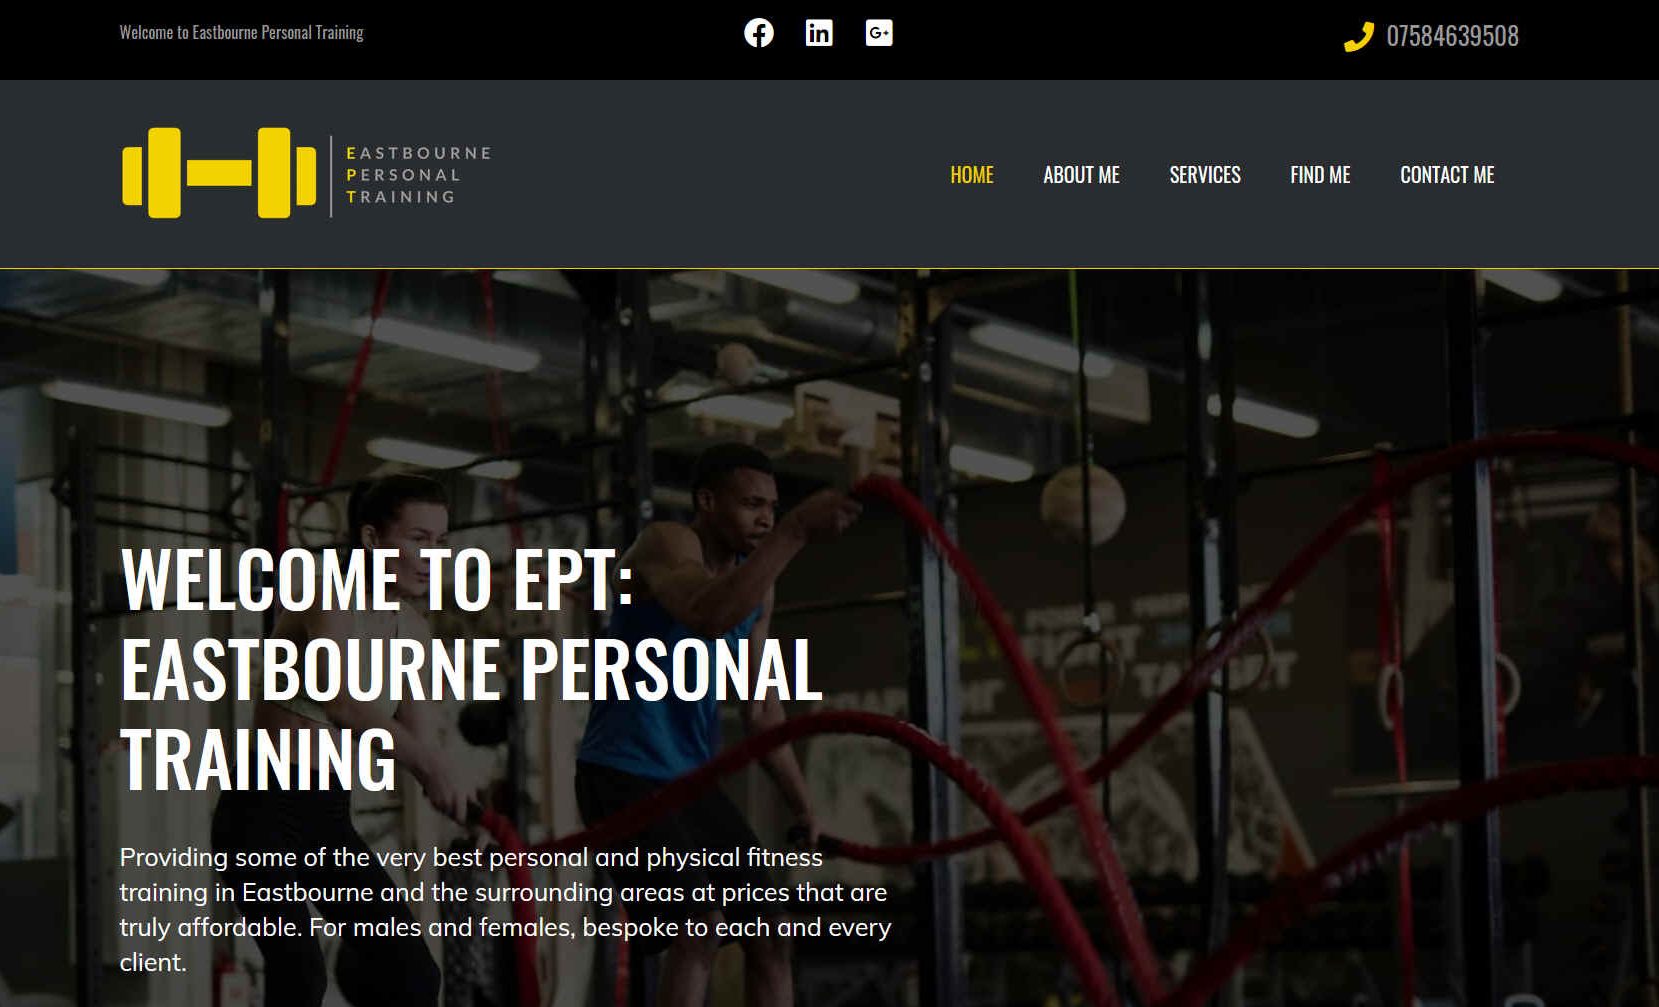 Eastbourne Personal Training EPT